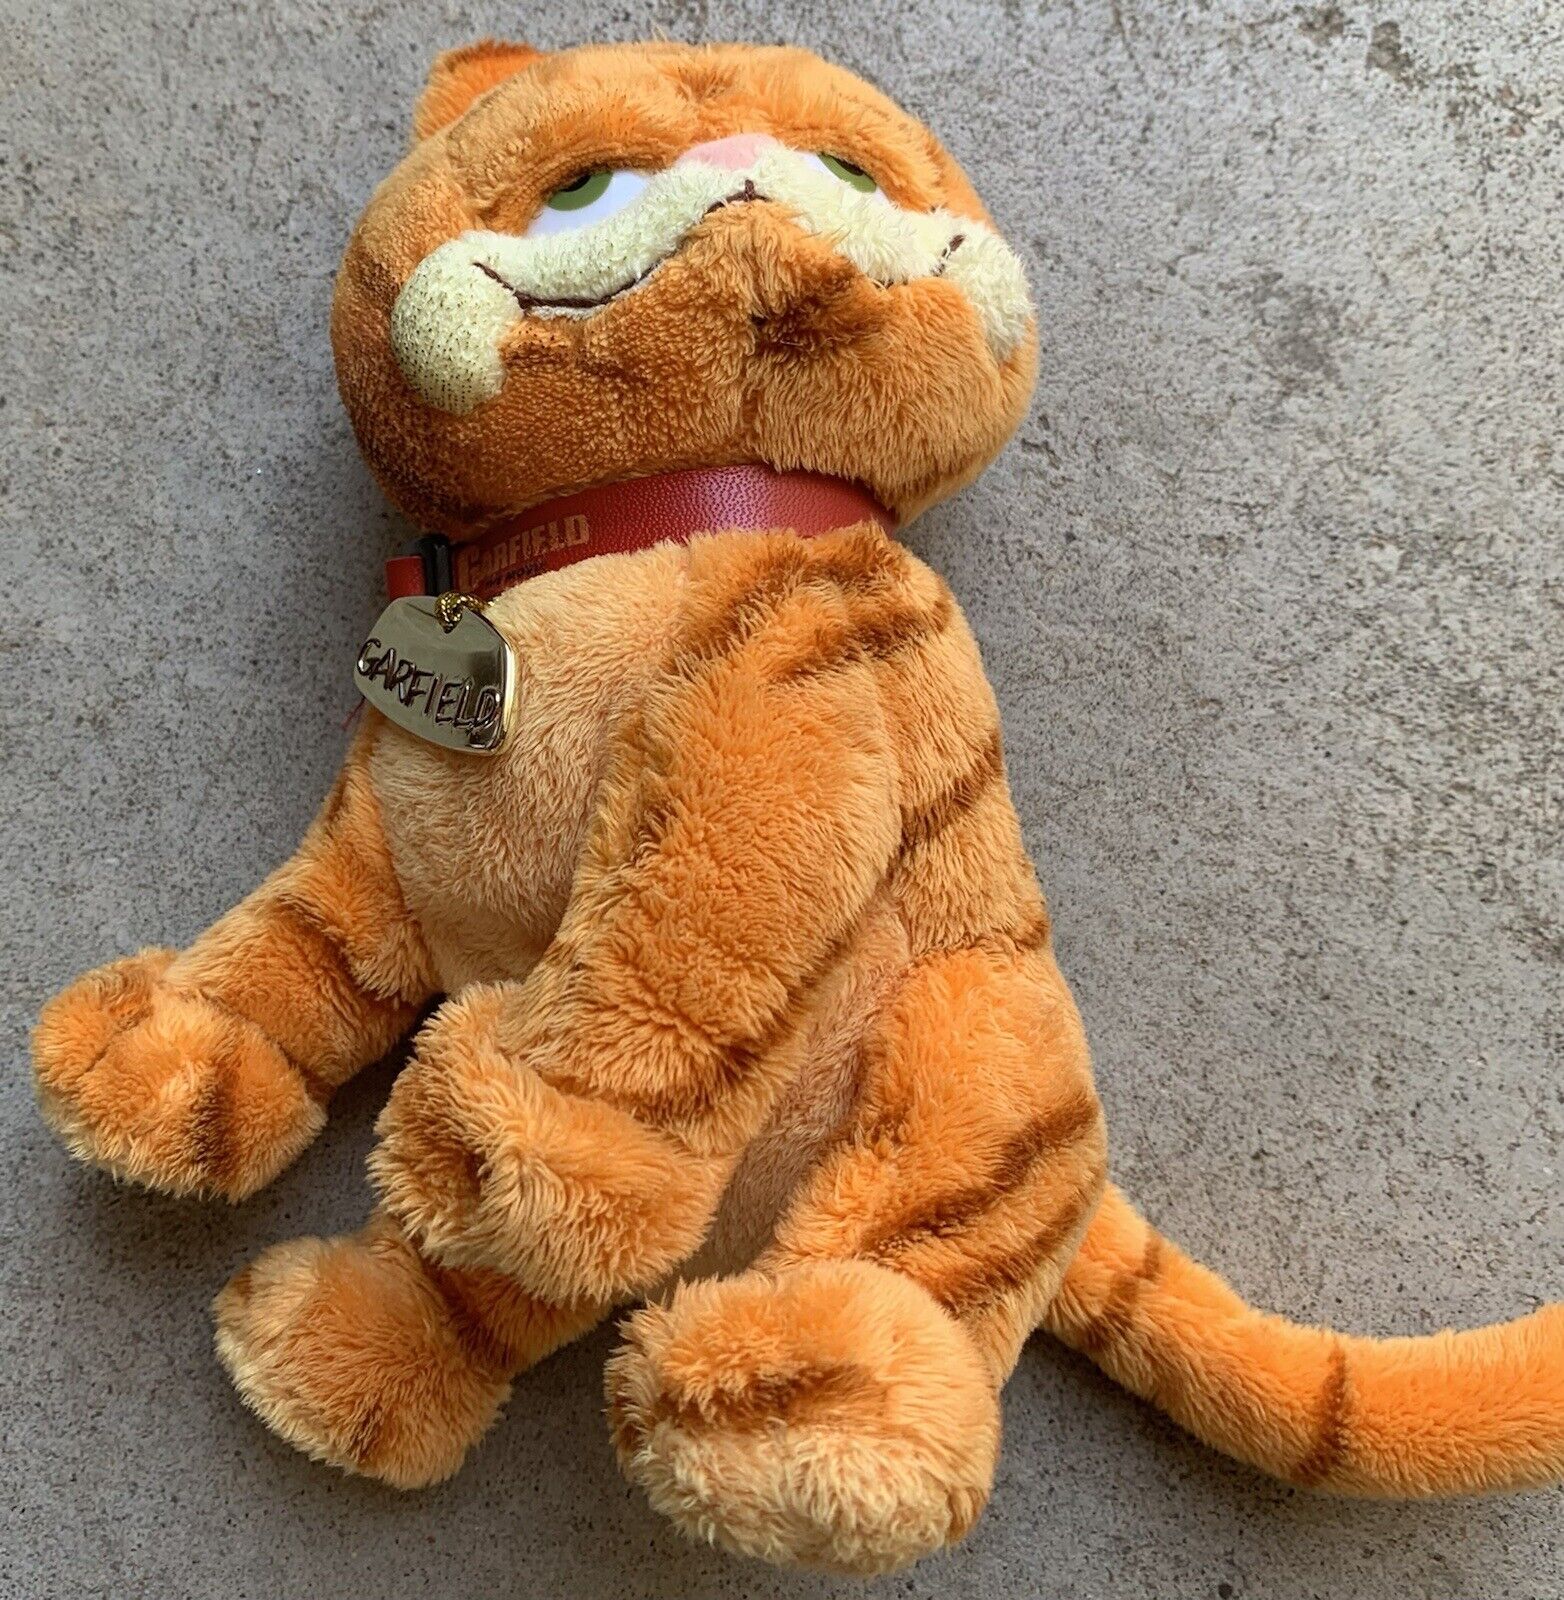 Ty Brand Garfield Cat Plush Toy Figure. Good conditioned 